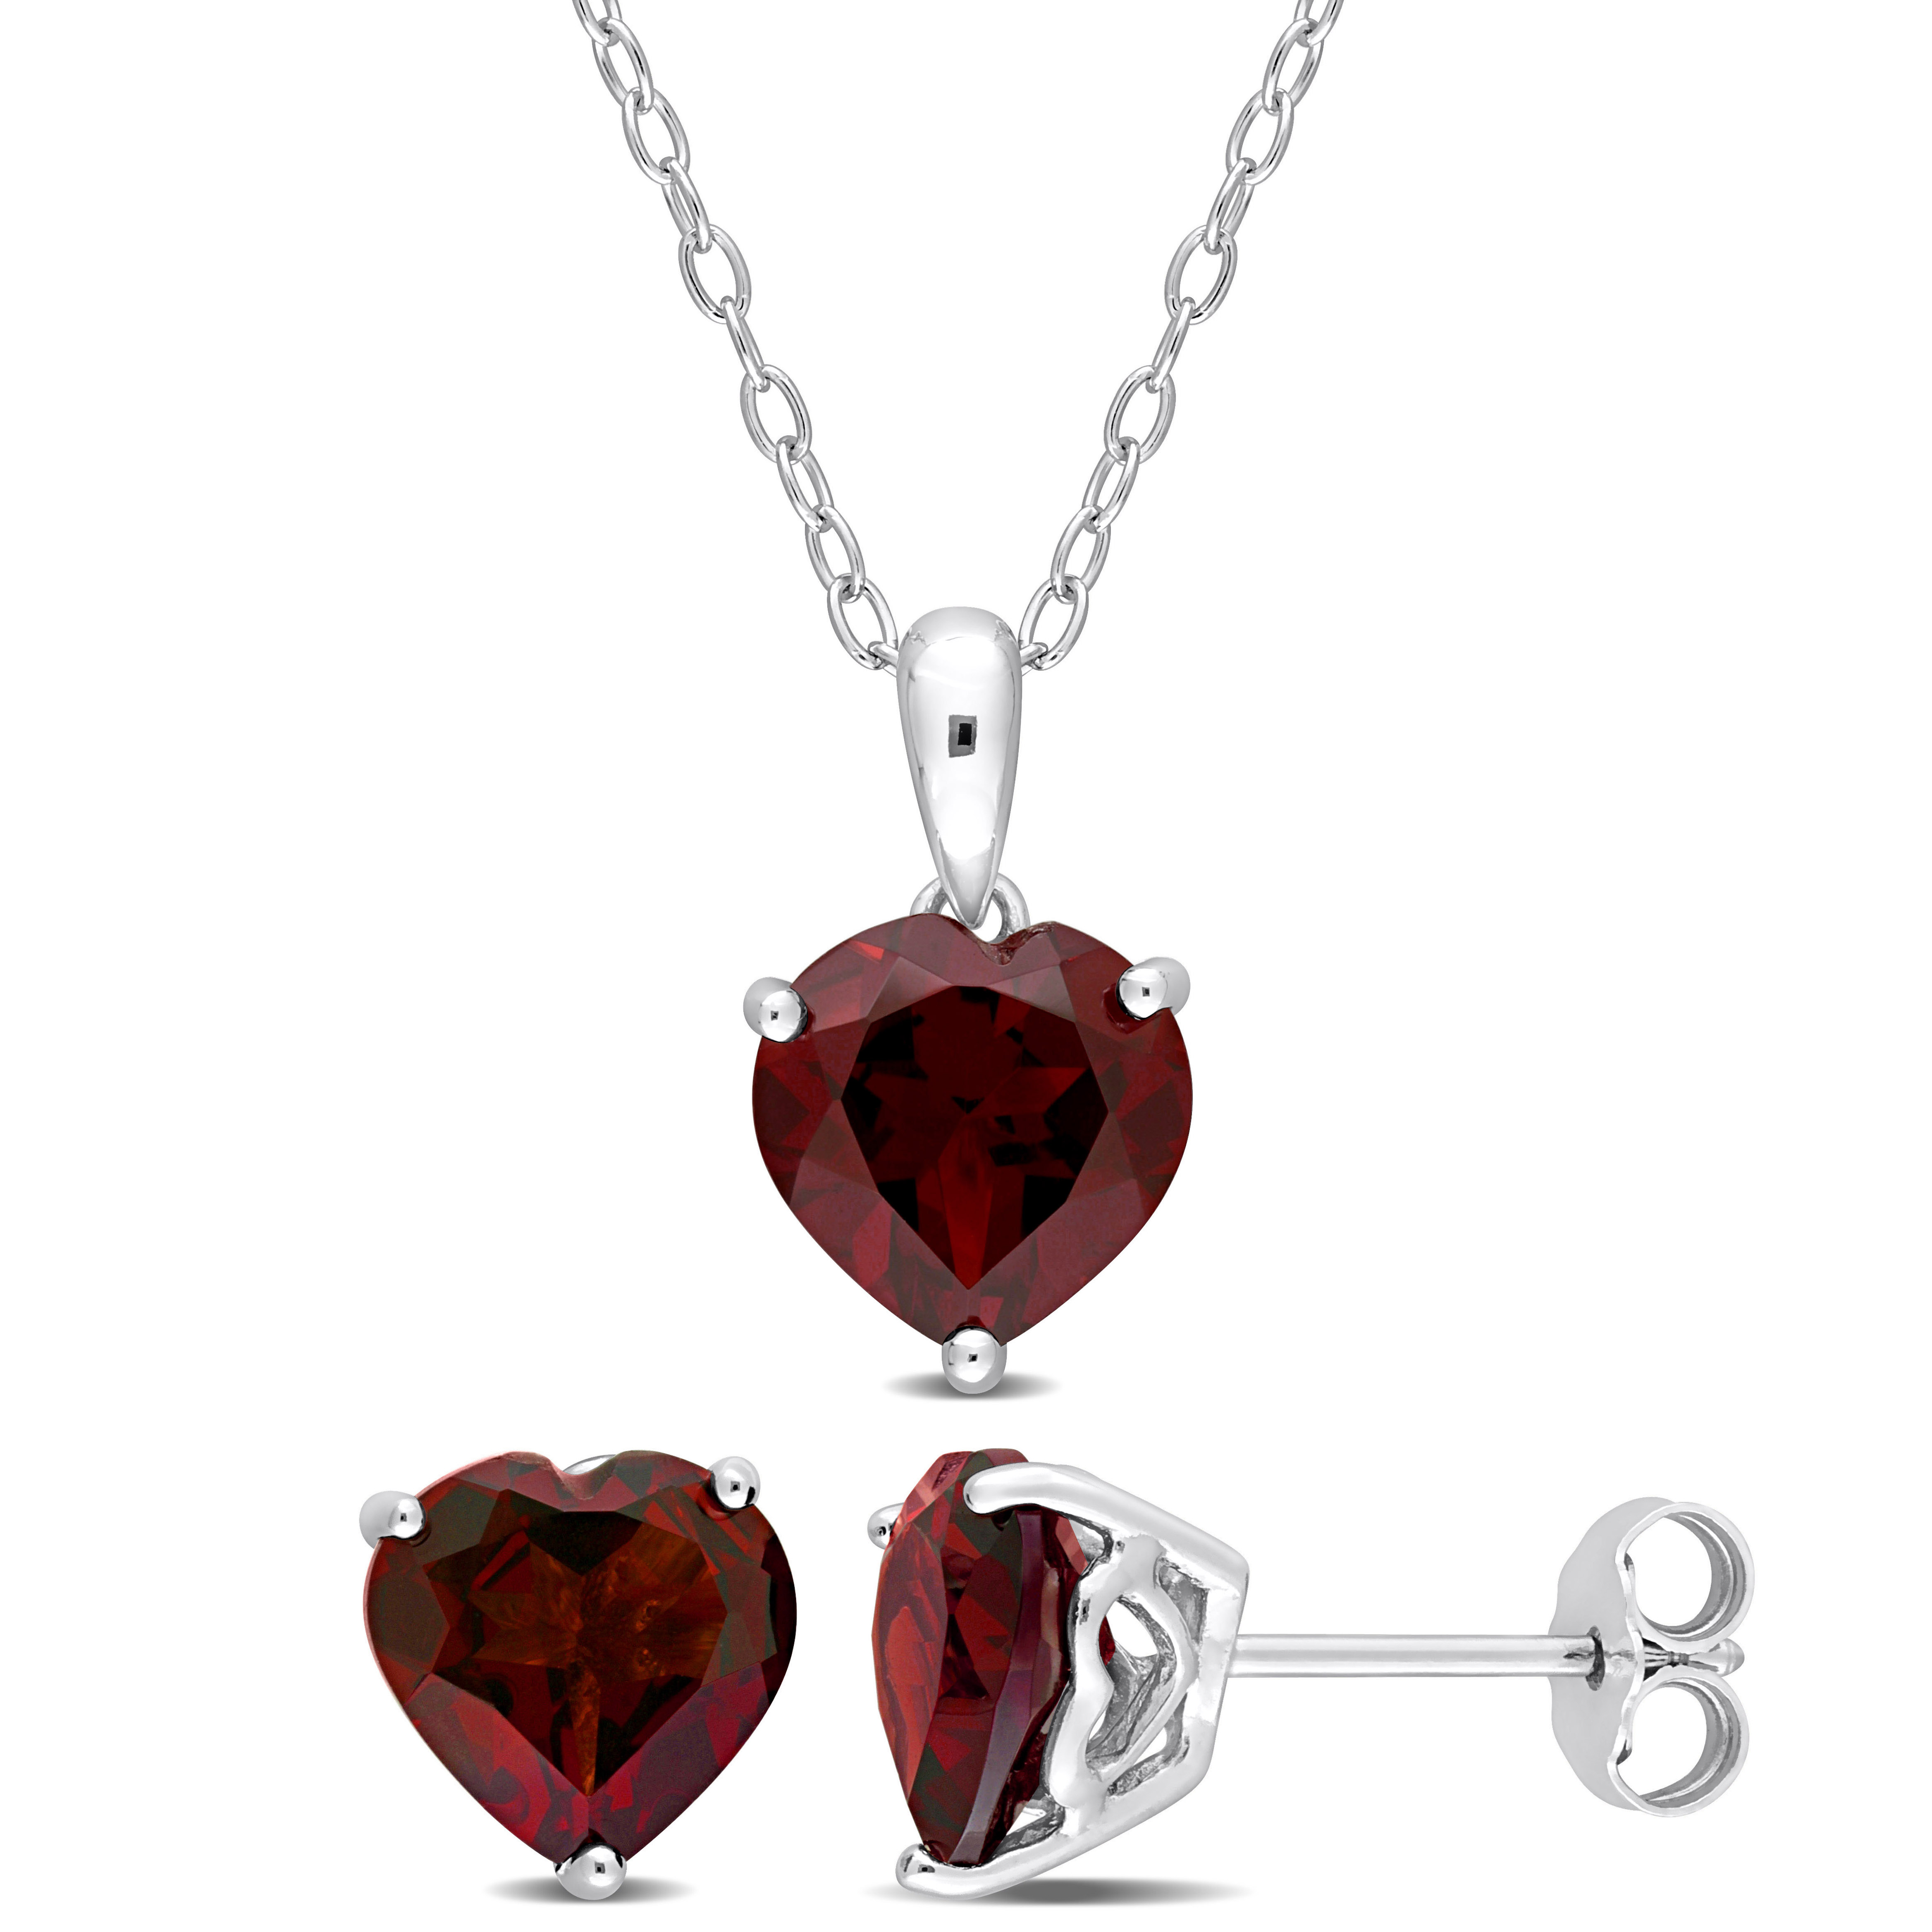 5 4/5 CT TGW Heart-Shape Garnet 2-Piece Set of Pendant with Chain and Earrings in Sterling Silver